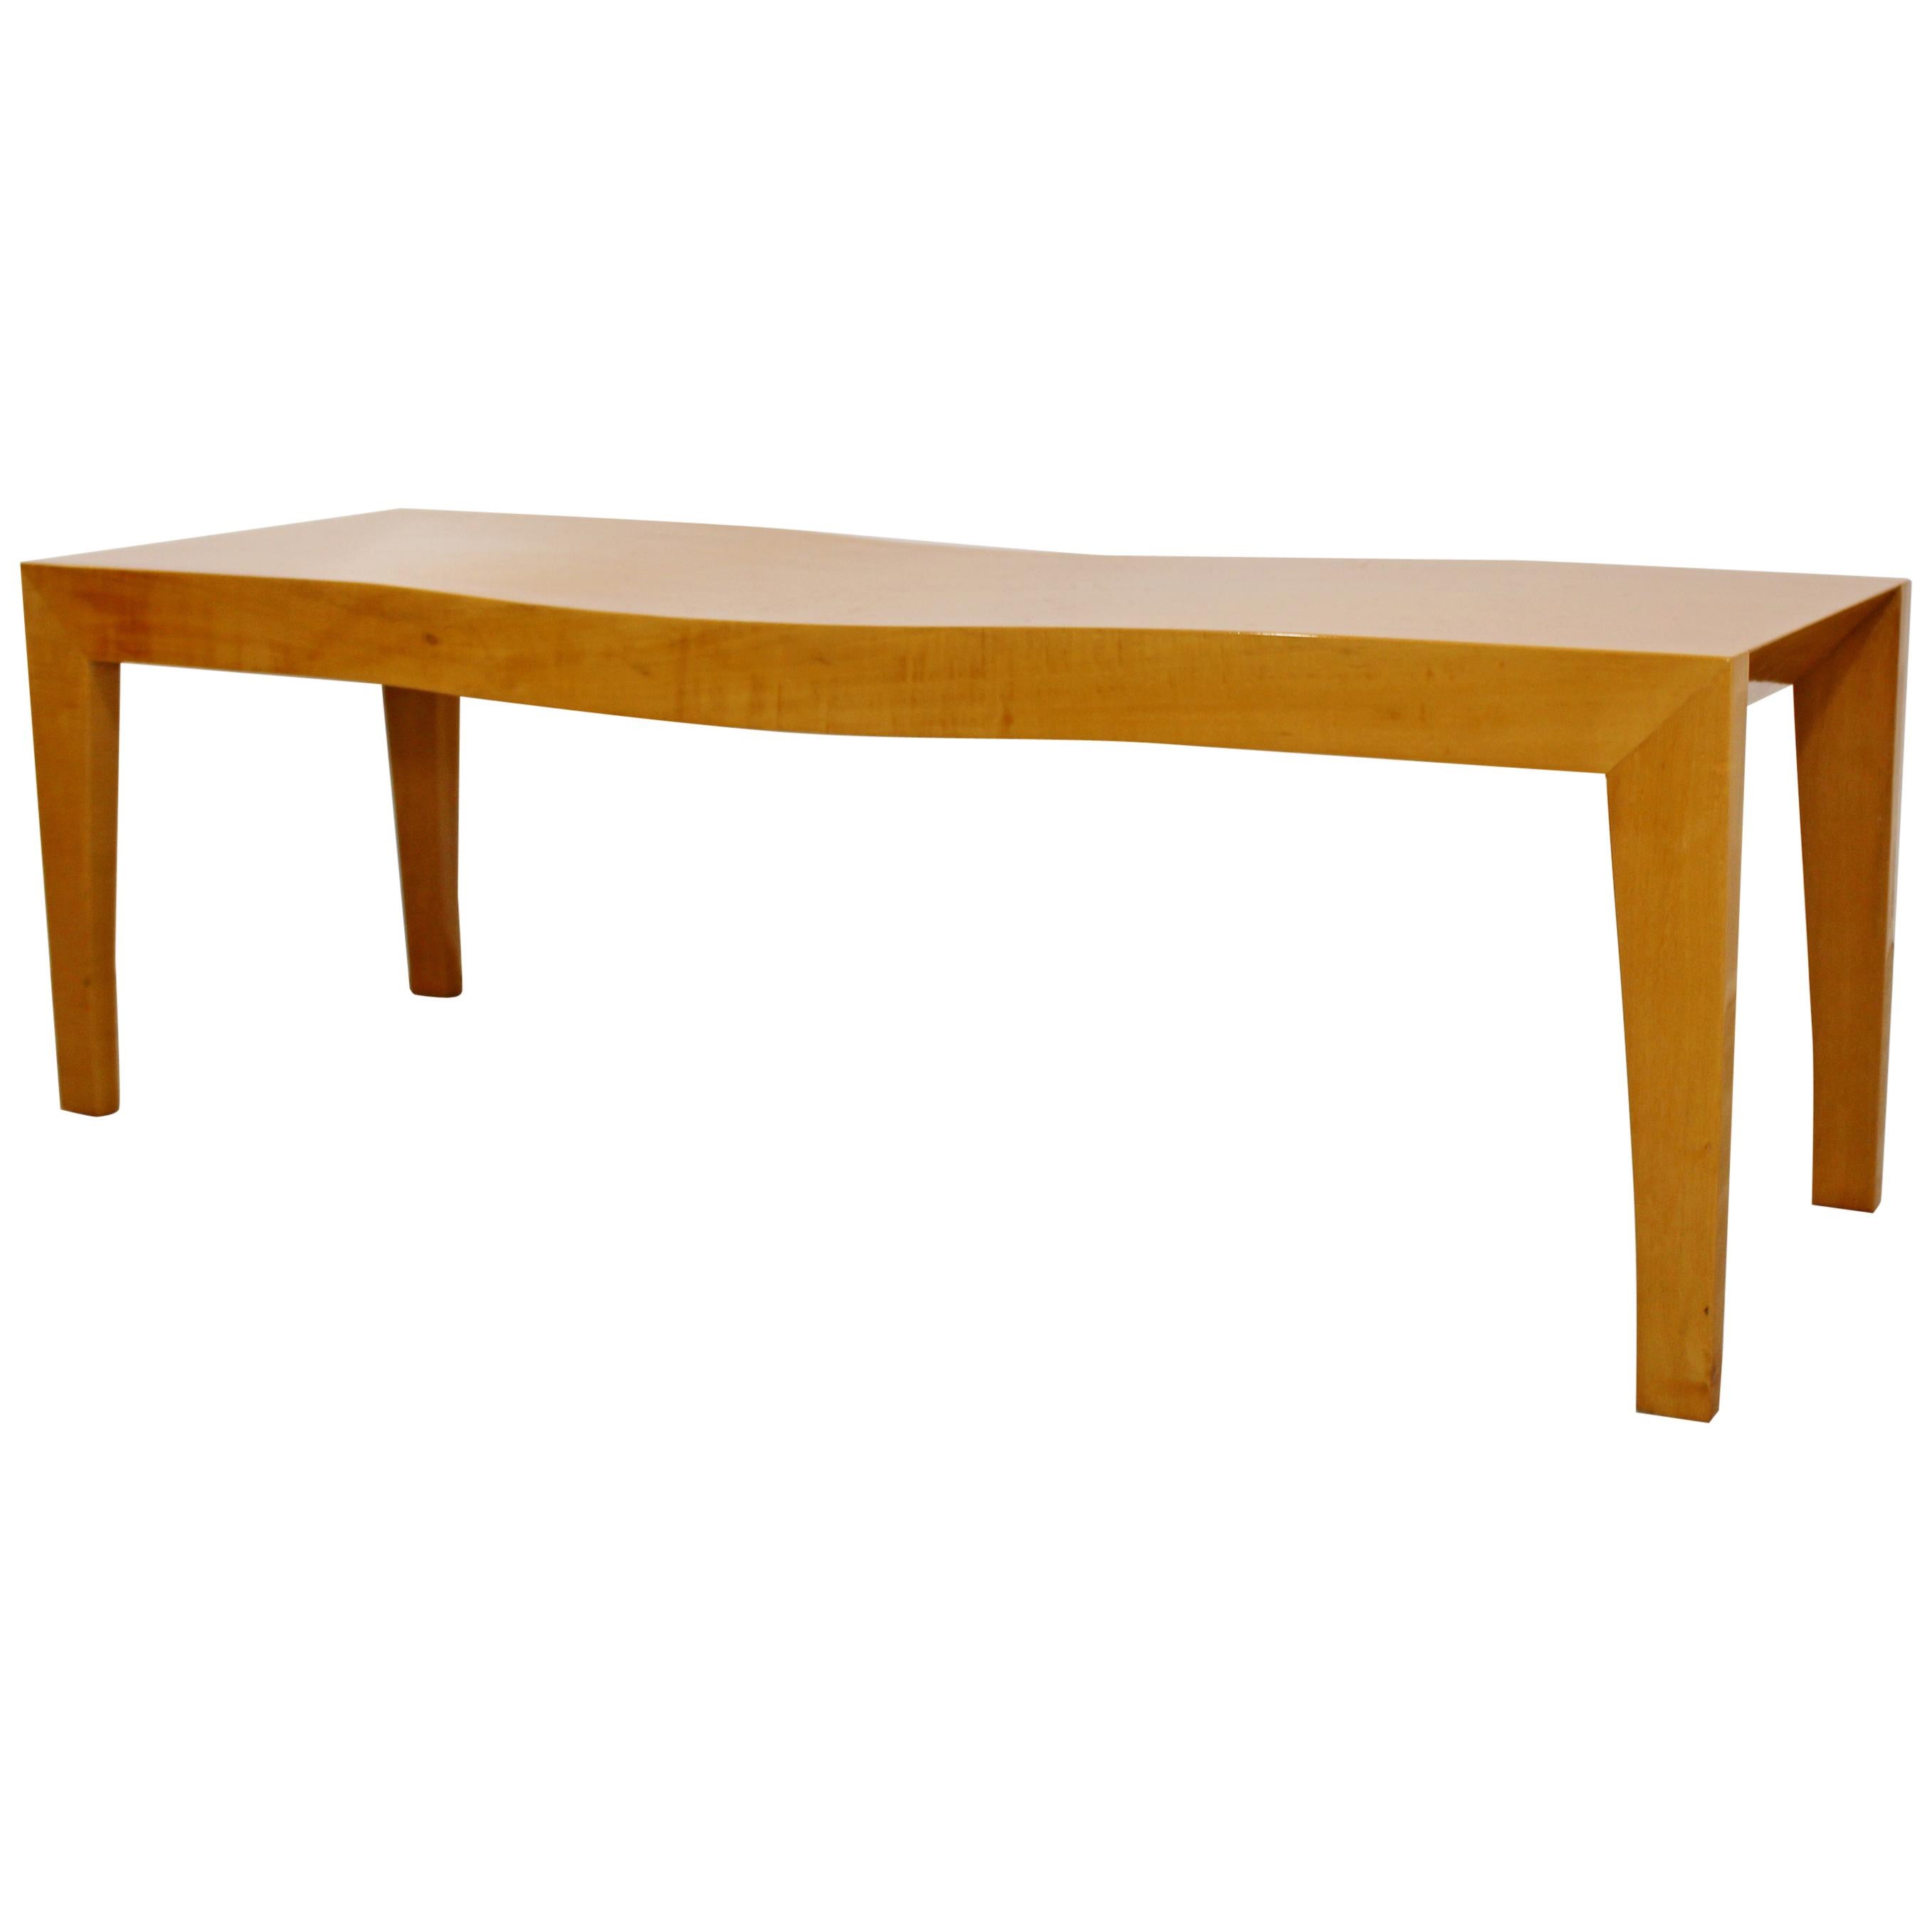 Mid-Century Modern Lacquered Maple 3-Seat Wave Bench, 1990s